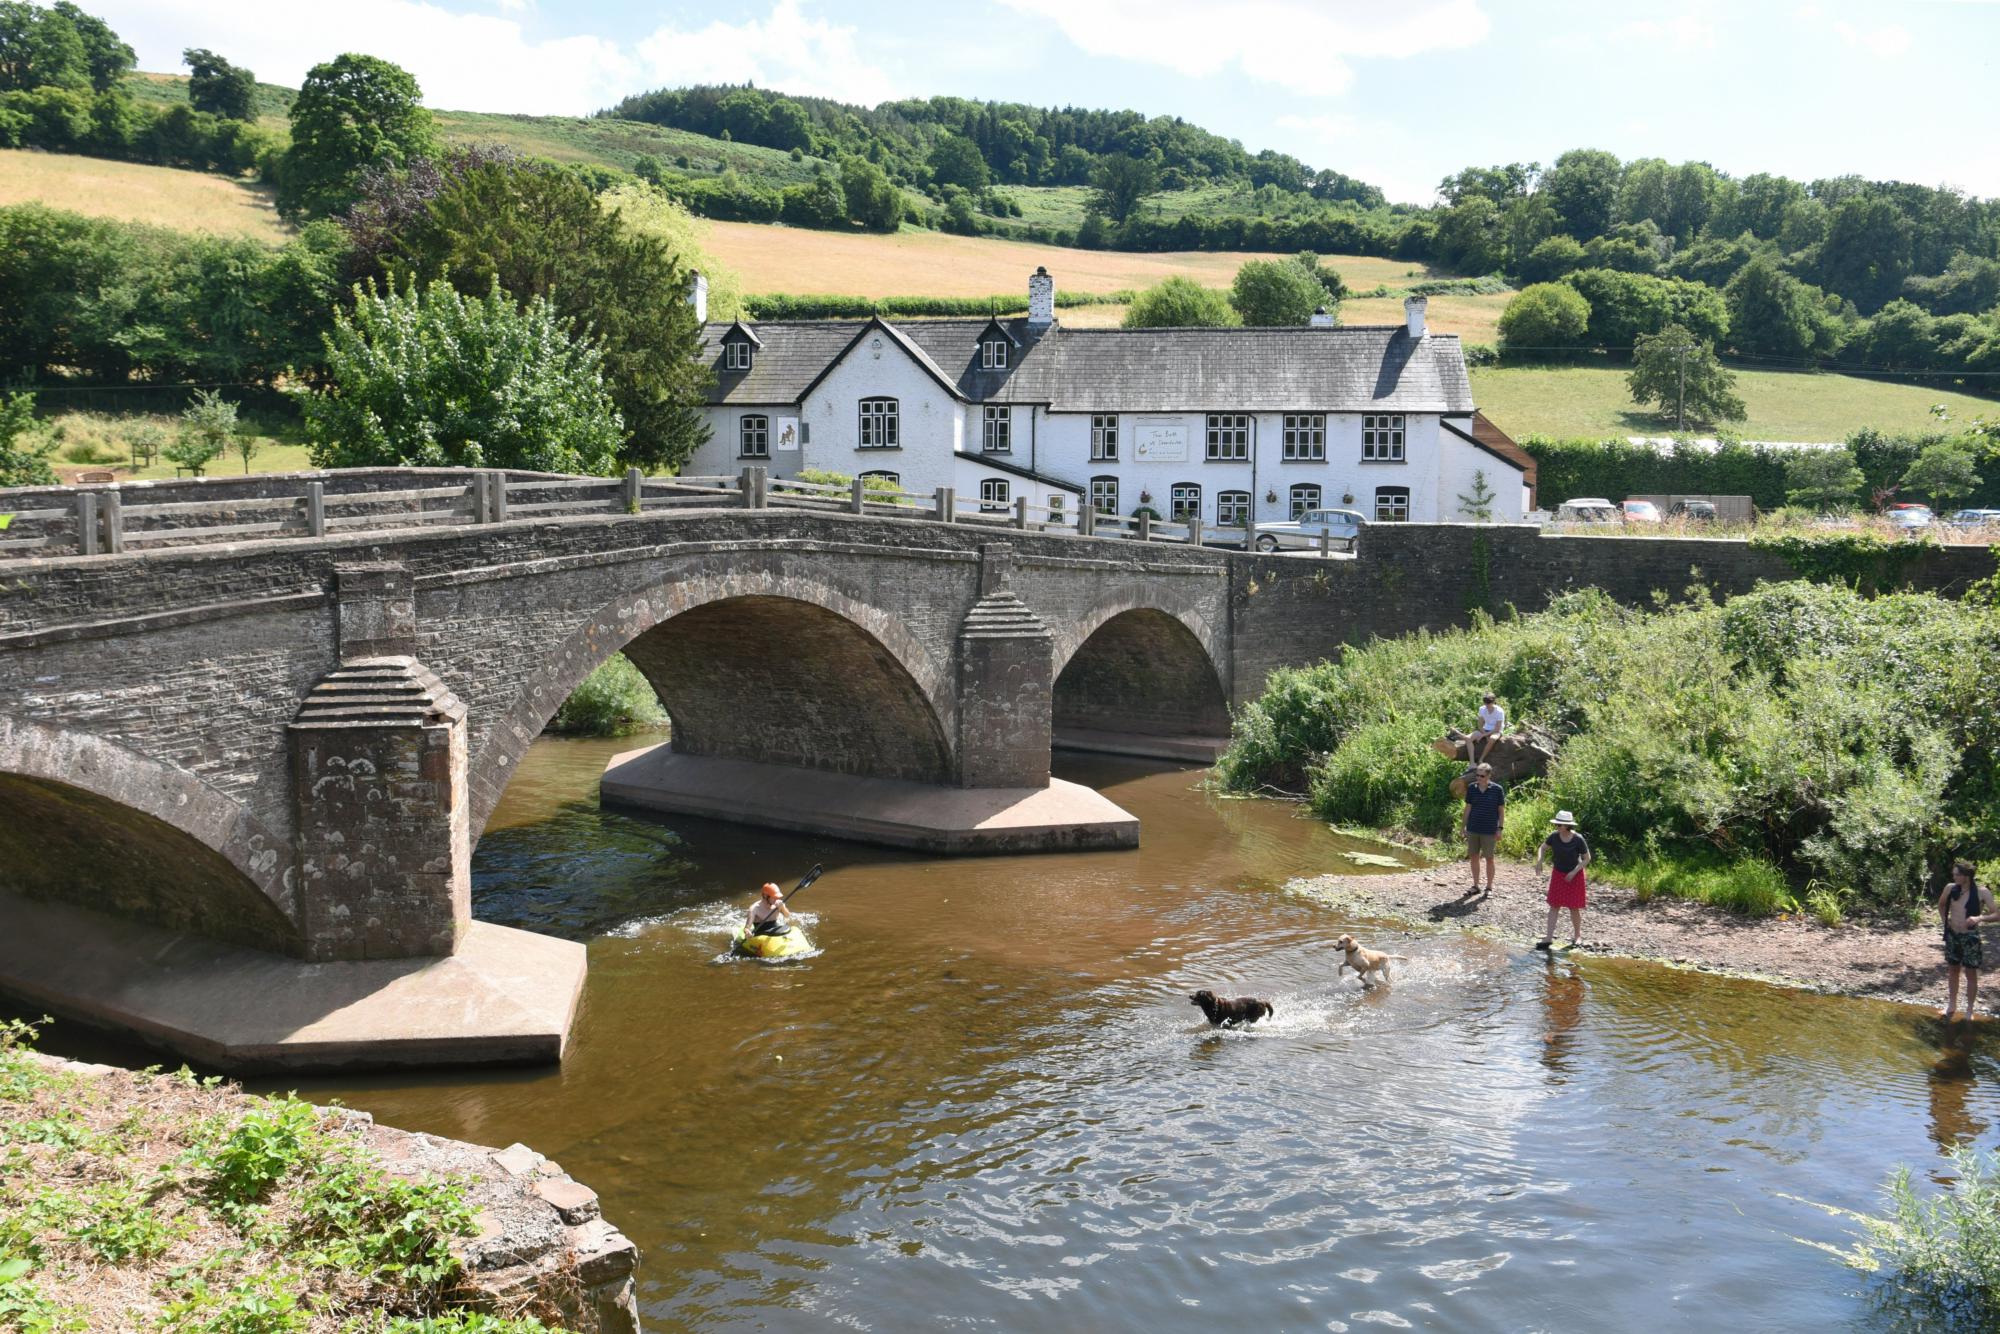 Hotels in Monmouthshire holidays at Cool Places